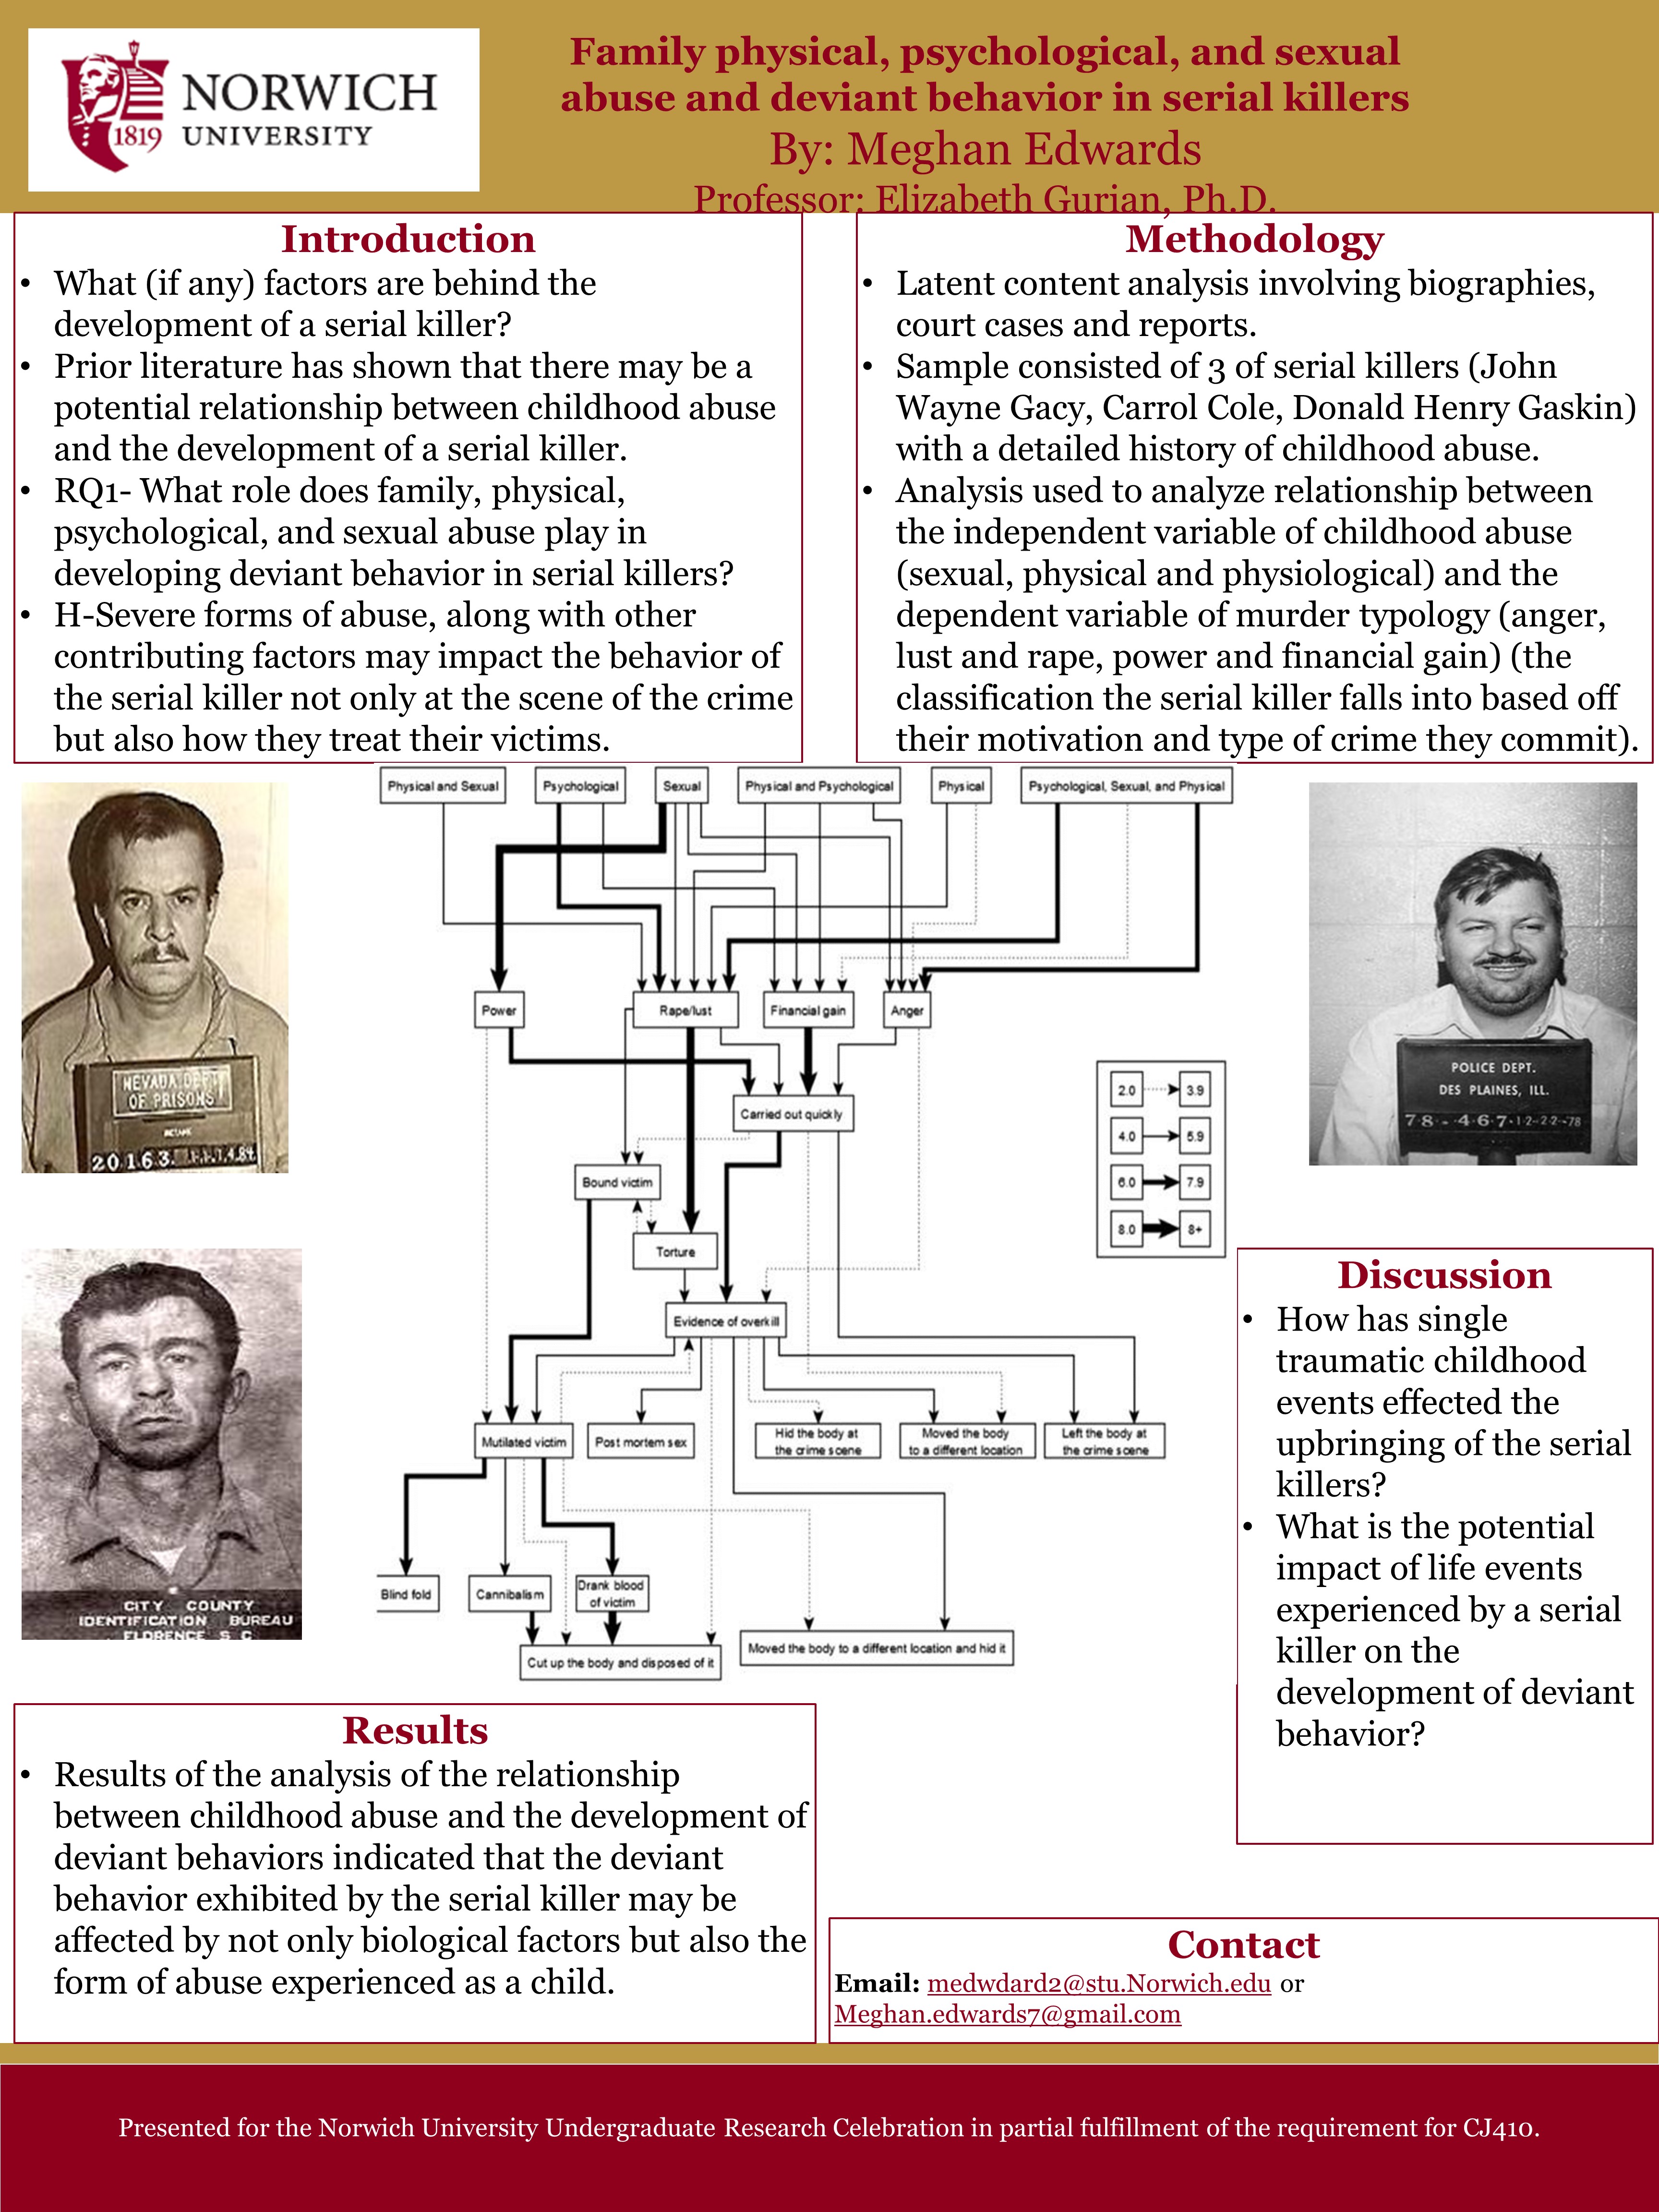 Showcase Image for Family physical, psychological, and sexual abuse and deviant behavior in serial killers